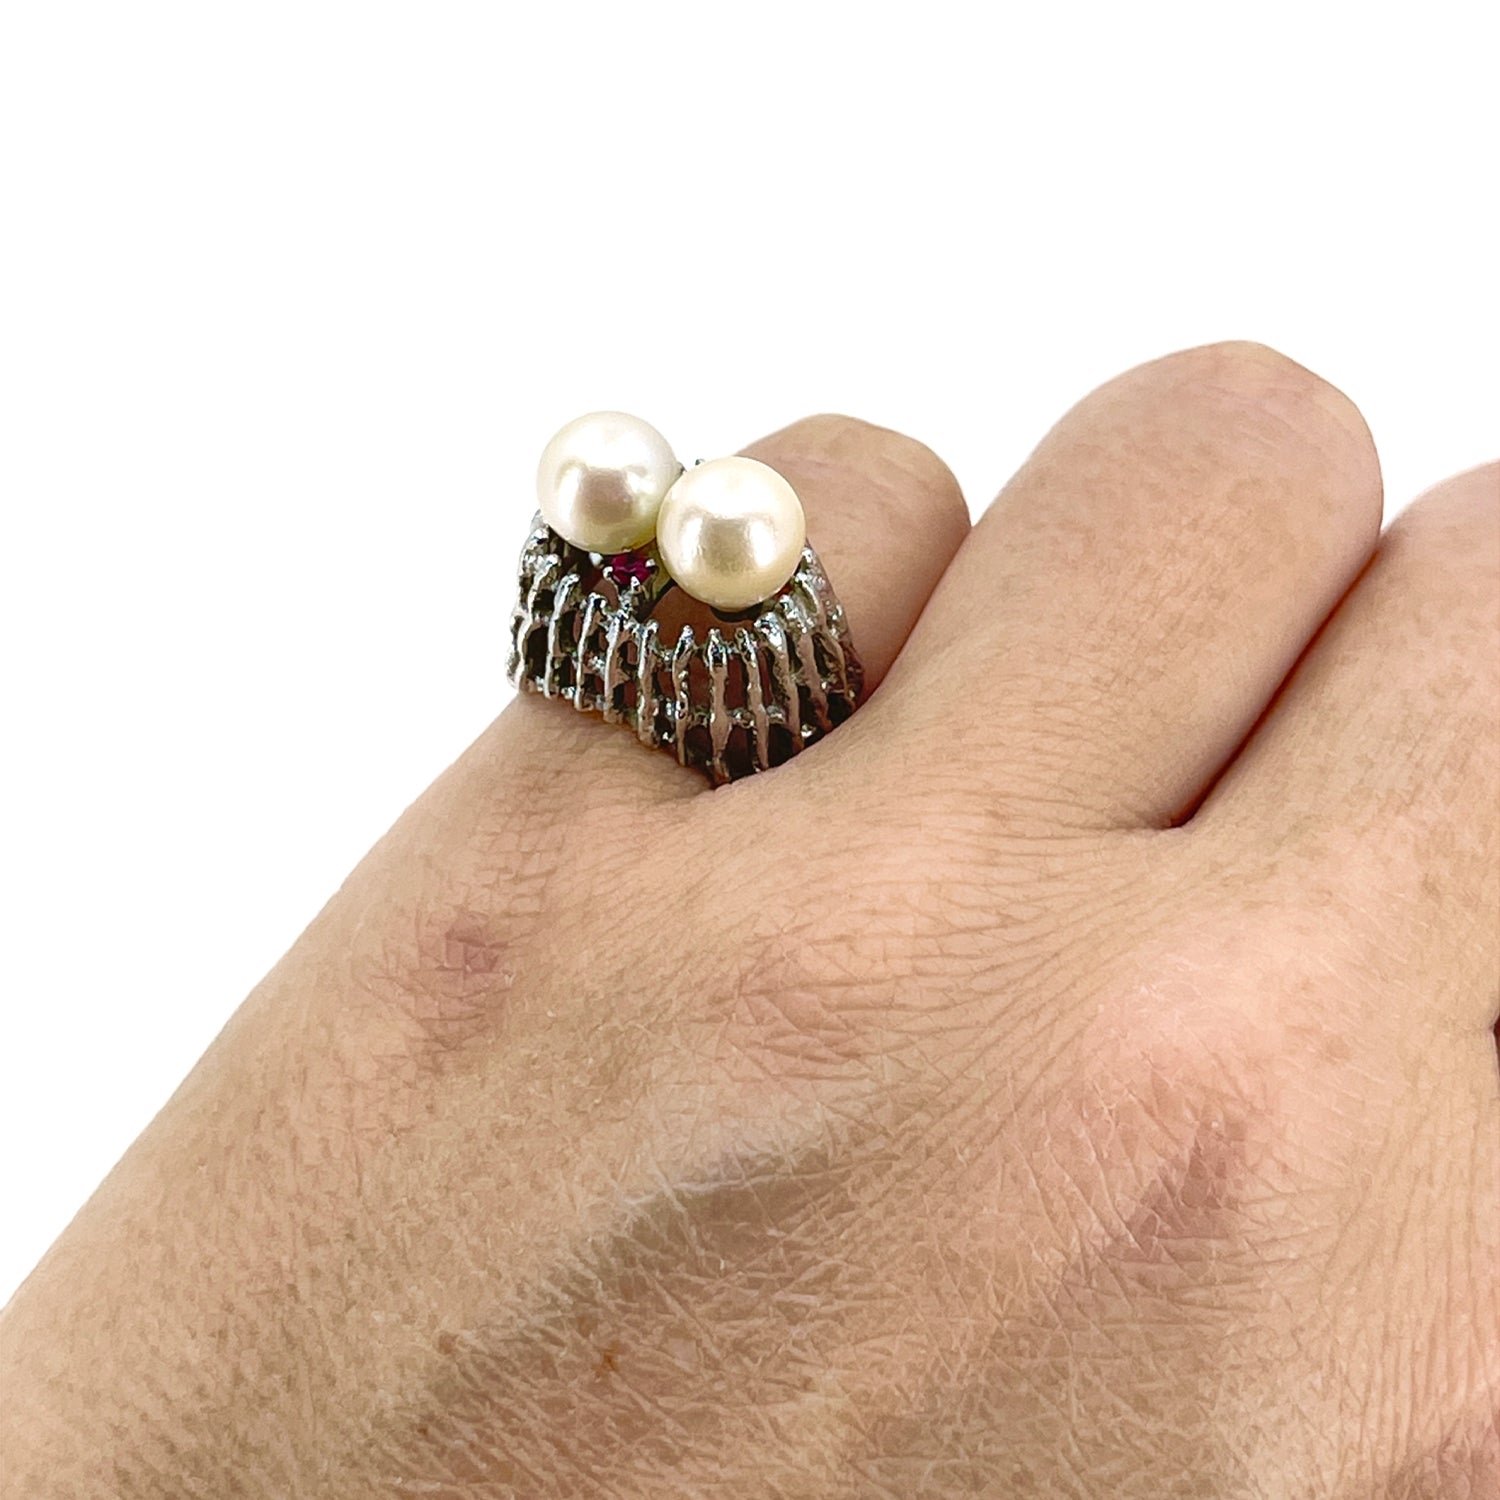 Abstract Double Pearl Japanese Saltwater Akoya Cultured Pearl Ring- Sterling Silver Sz 5 1/2